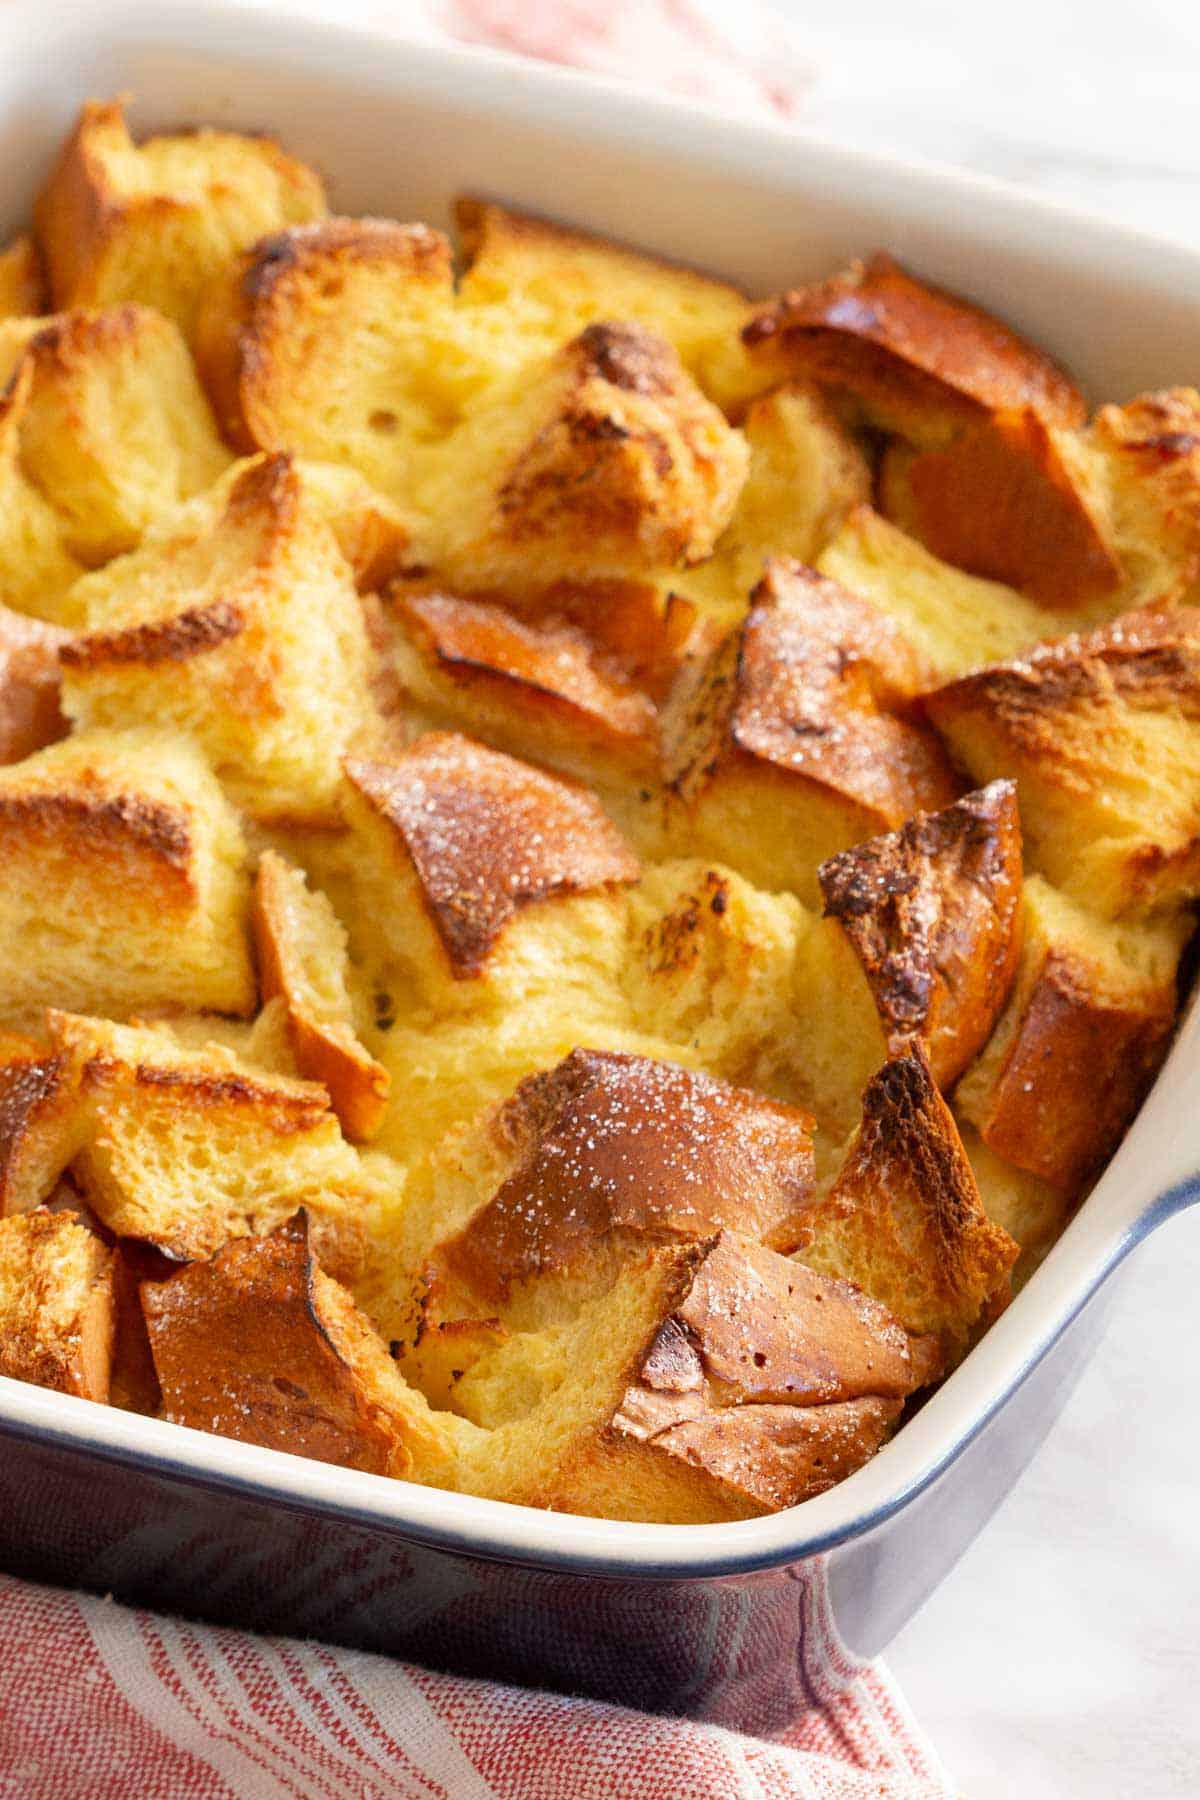 A slightly overhead angled view of a baking dish of bread pudding.